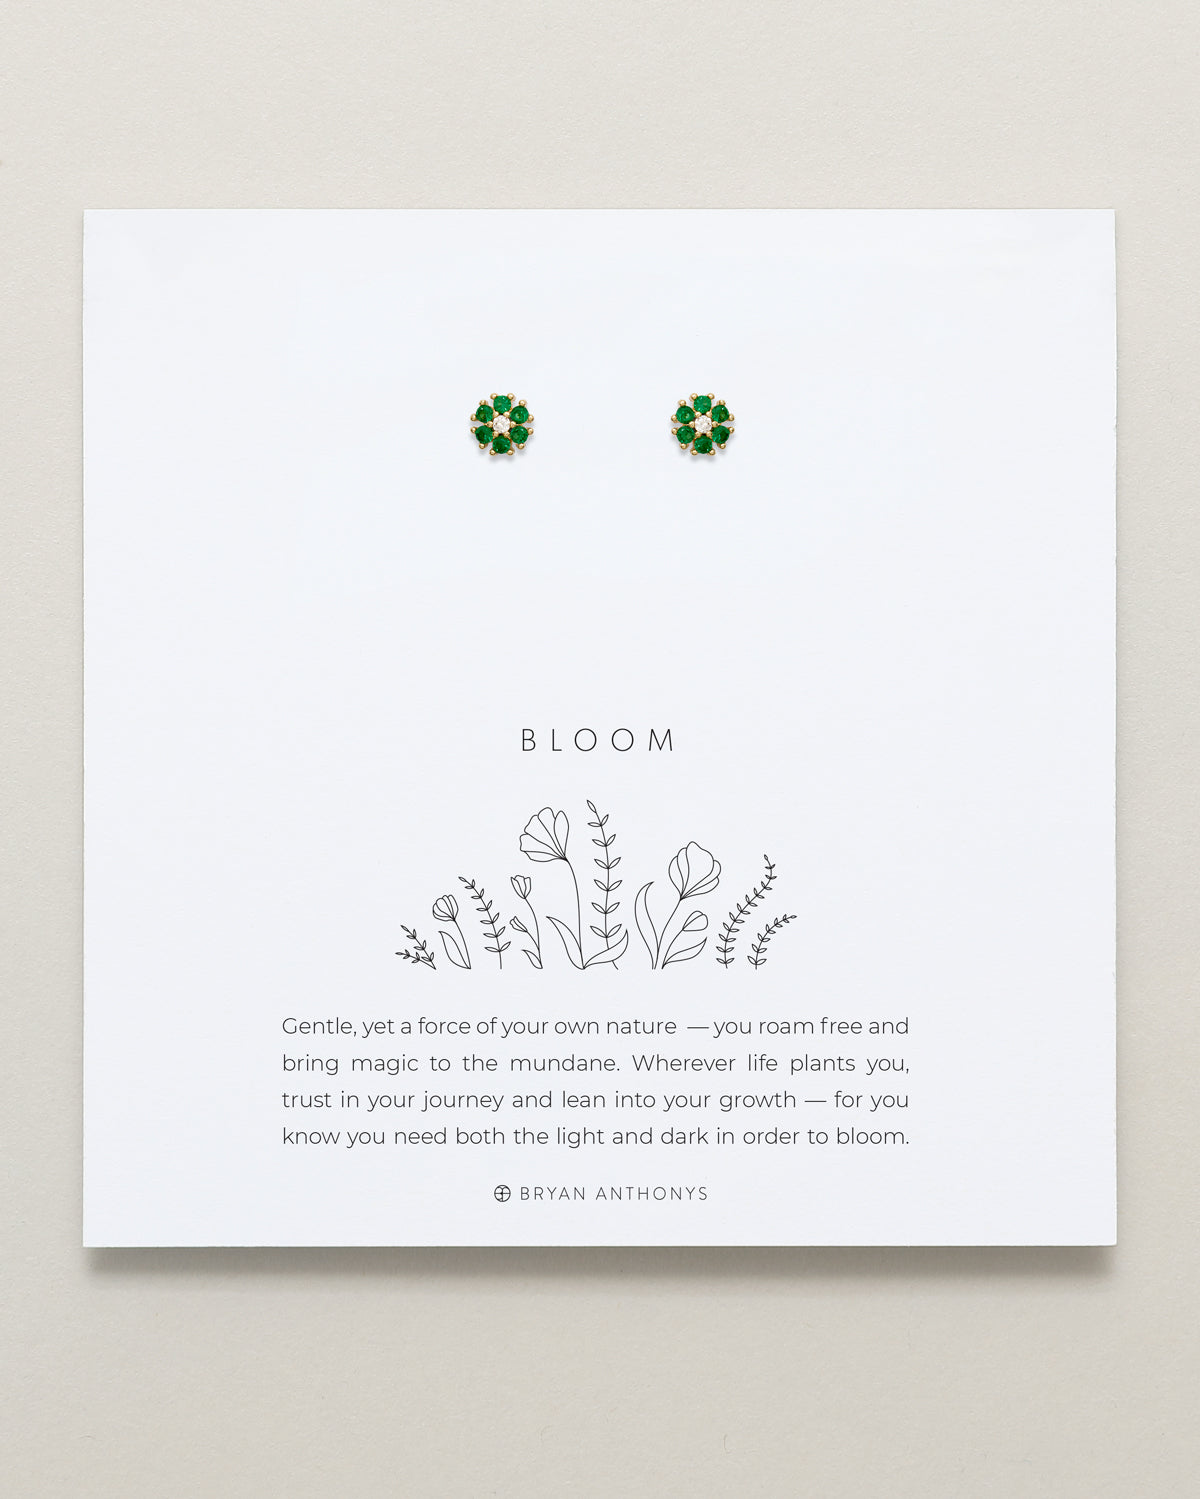 Bryan Anthonys Bloom Green Gold Stud Earrings On Card